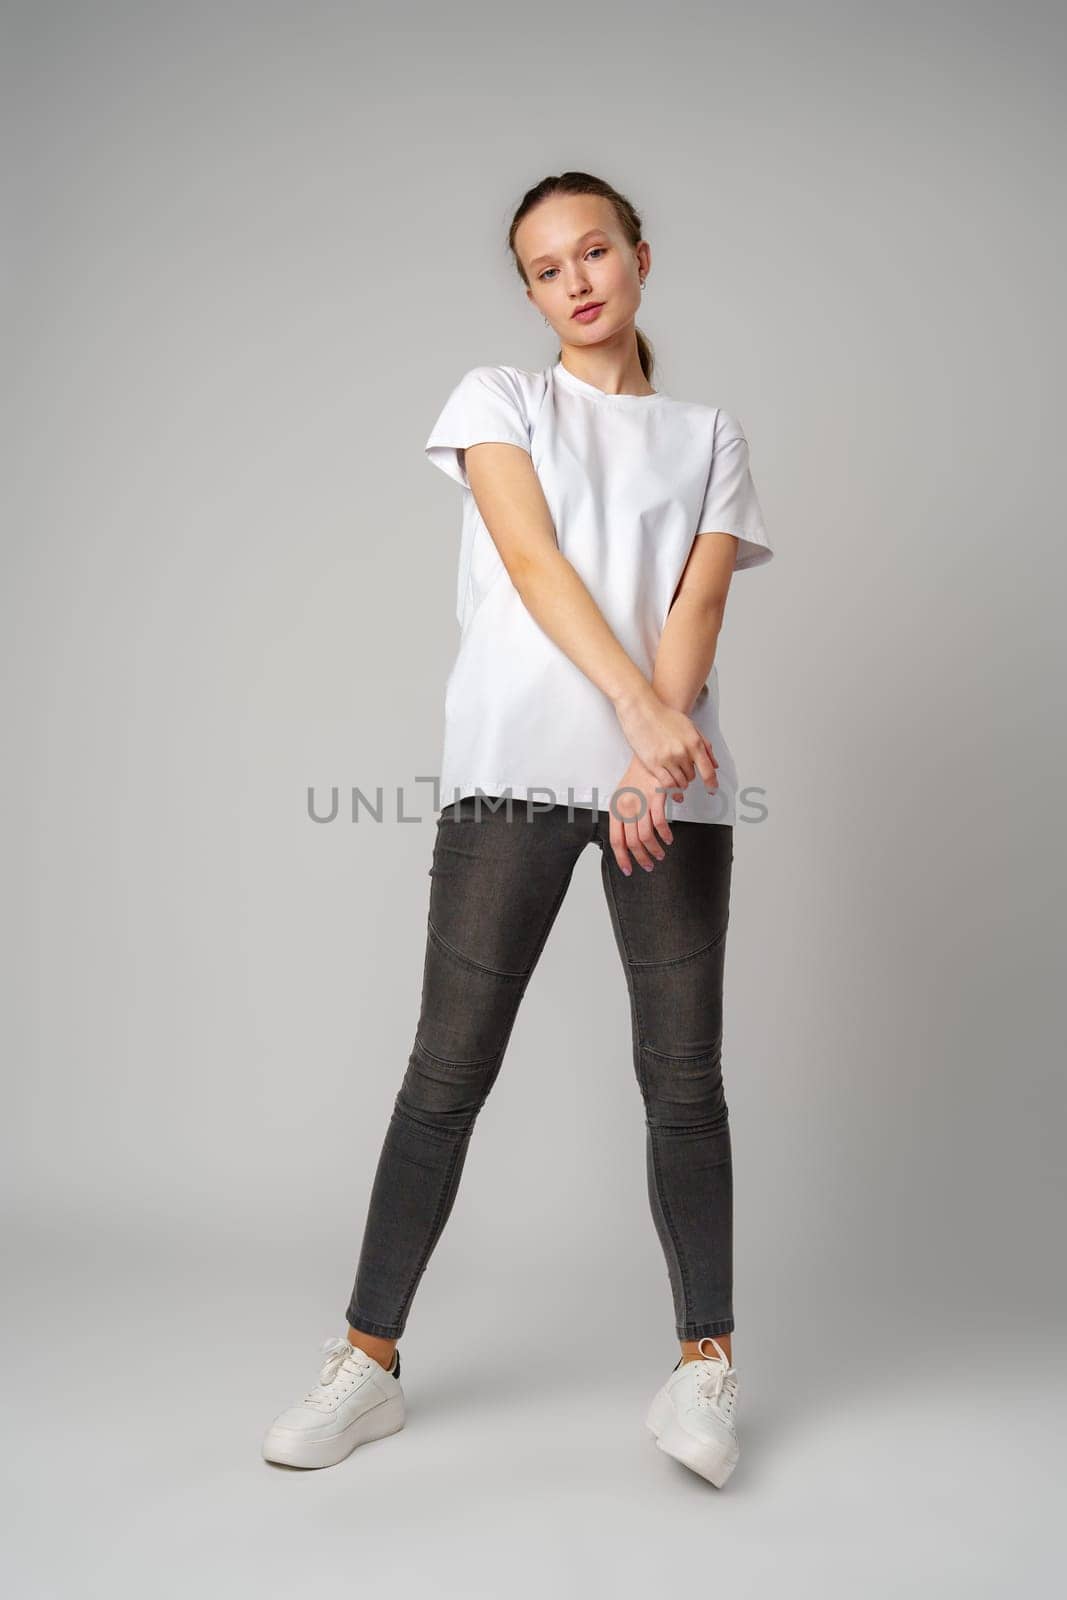 Beautiful young girl posing in white T-shirt and jeans on gray background by Fabrikasimf